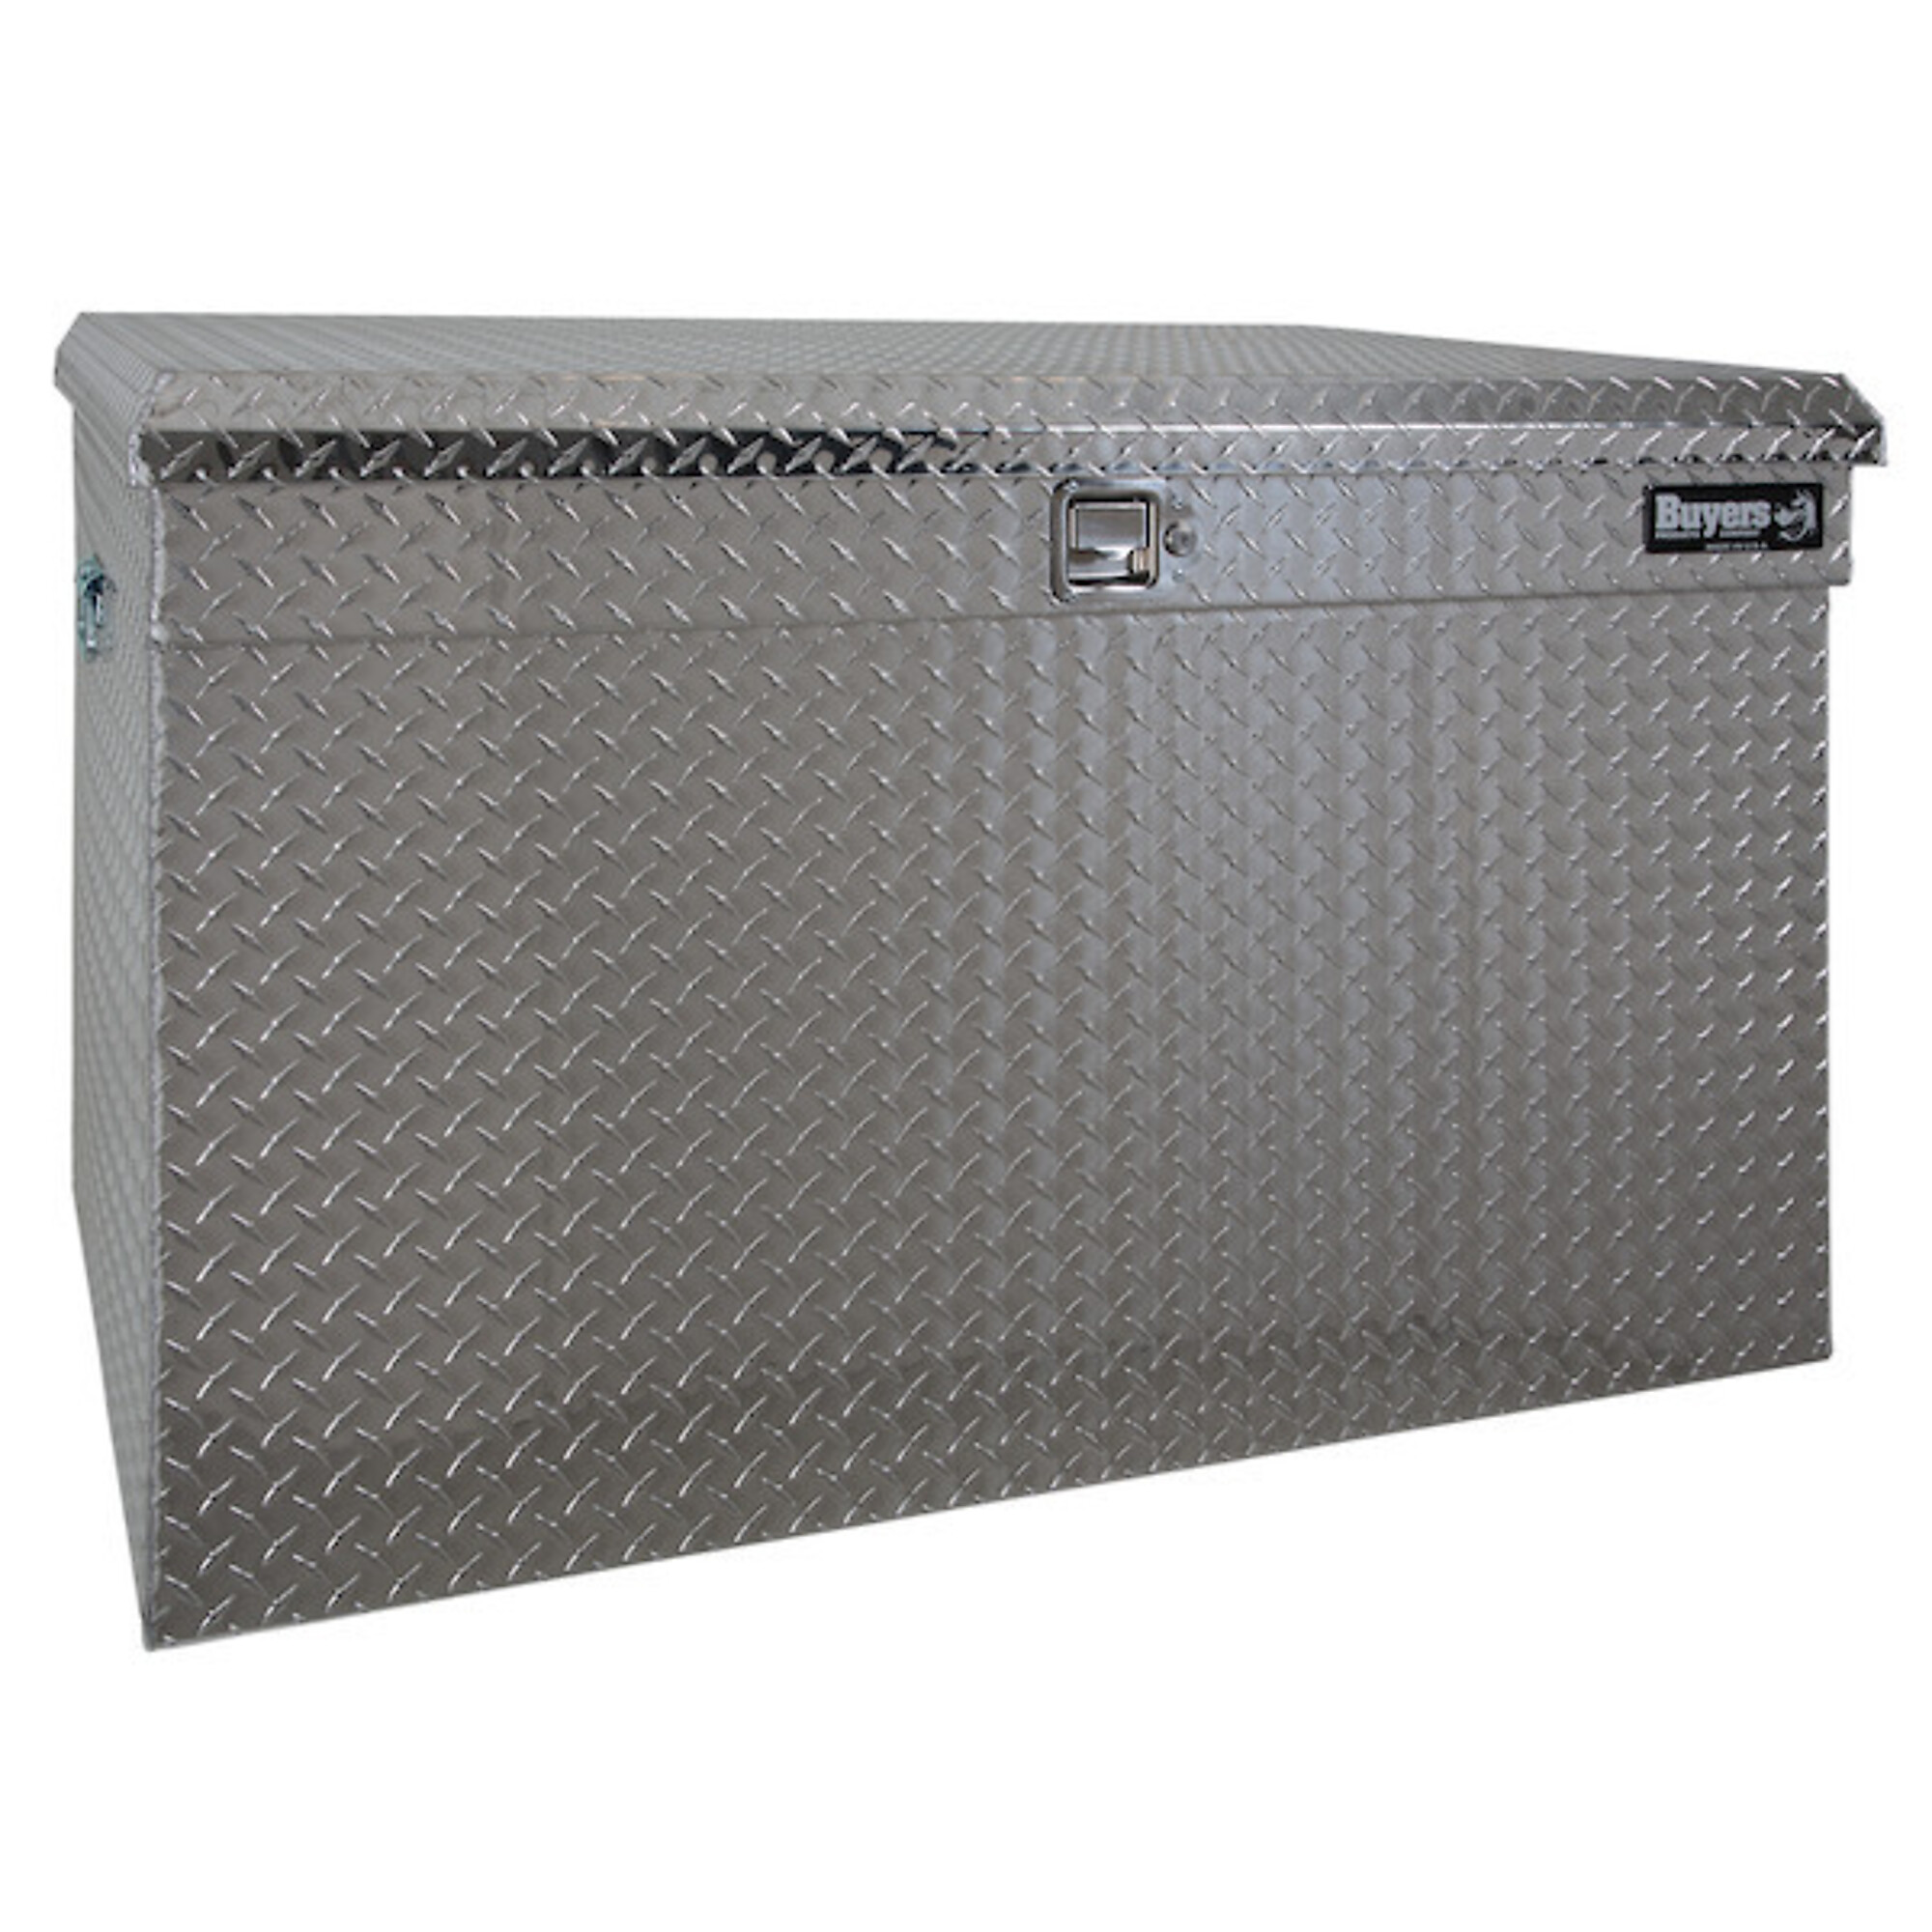 Buyers Products All-Purpose Chest, 49Inch Aluminum, Diamond Plate Silver, Model 1712120